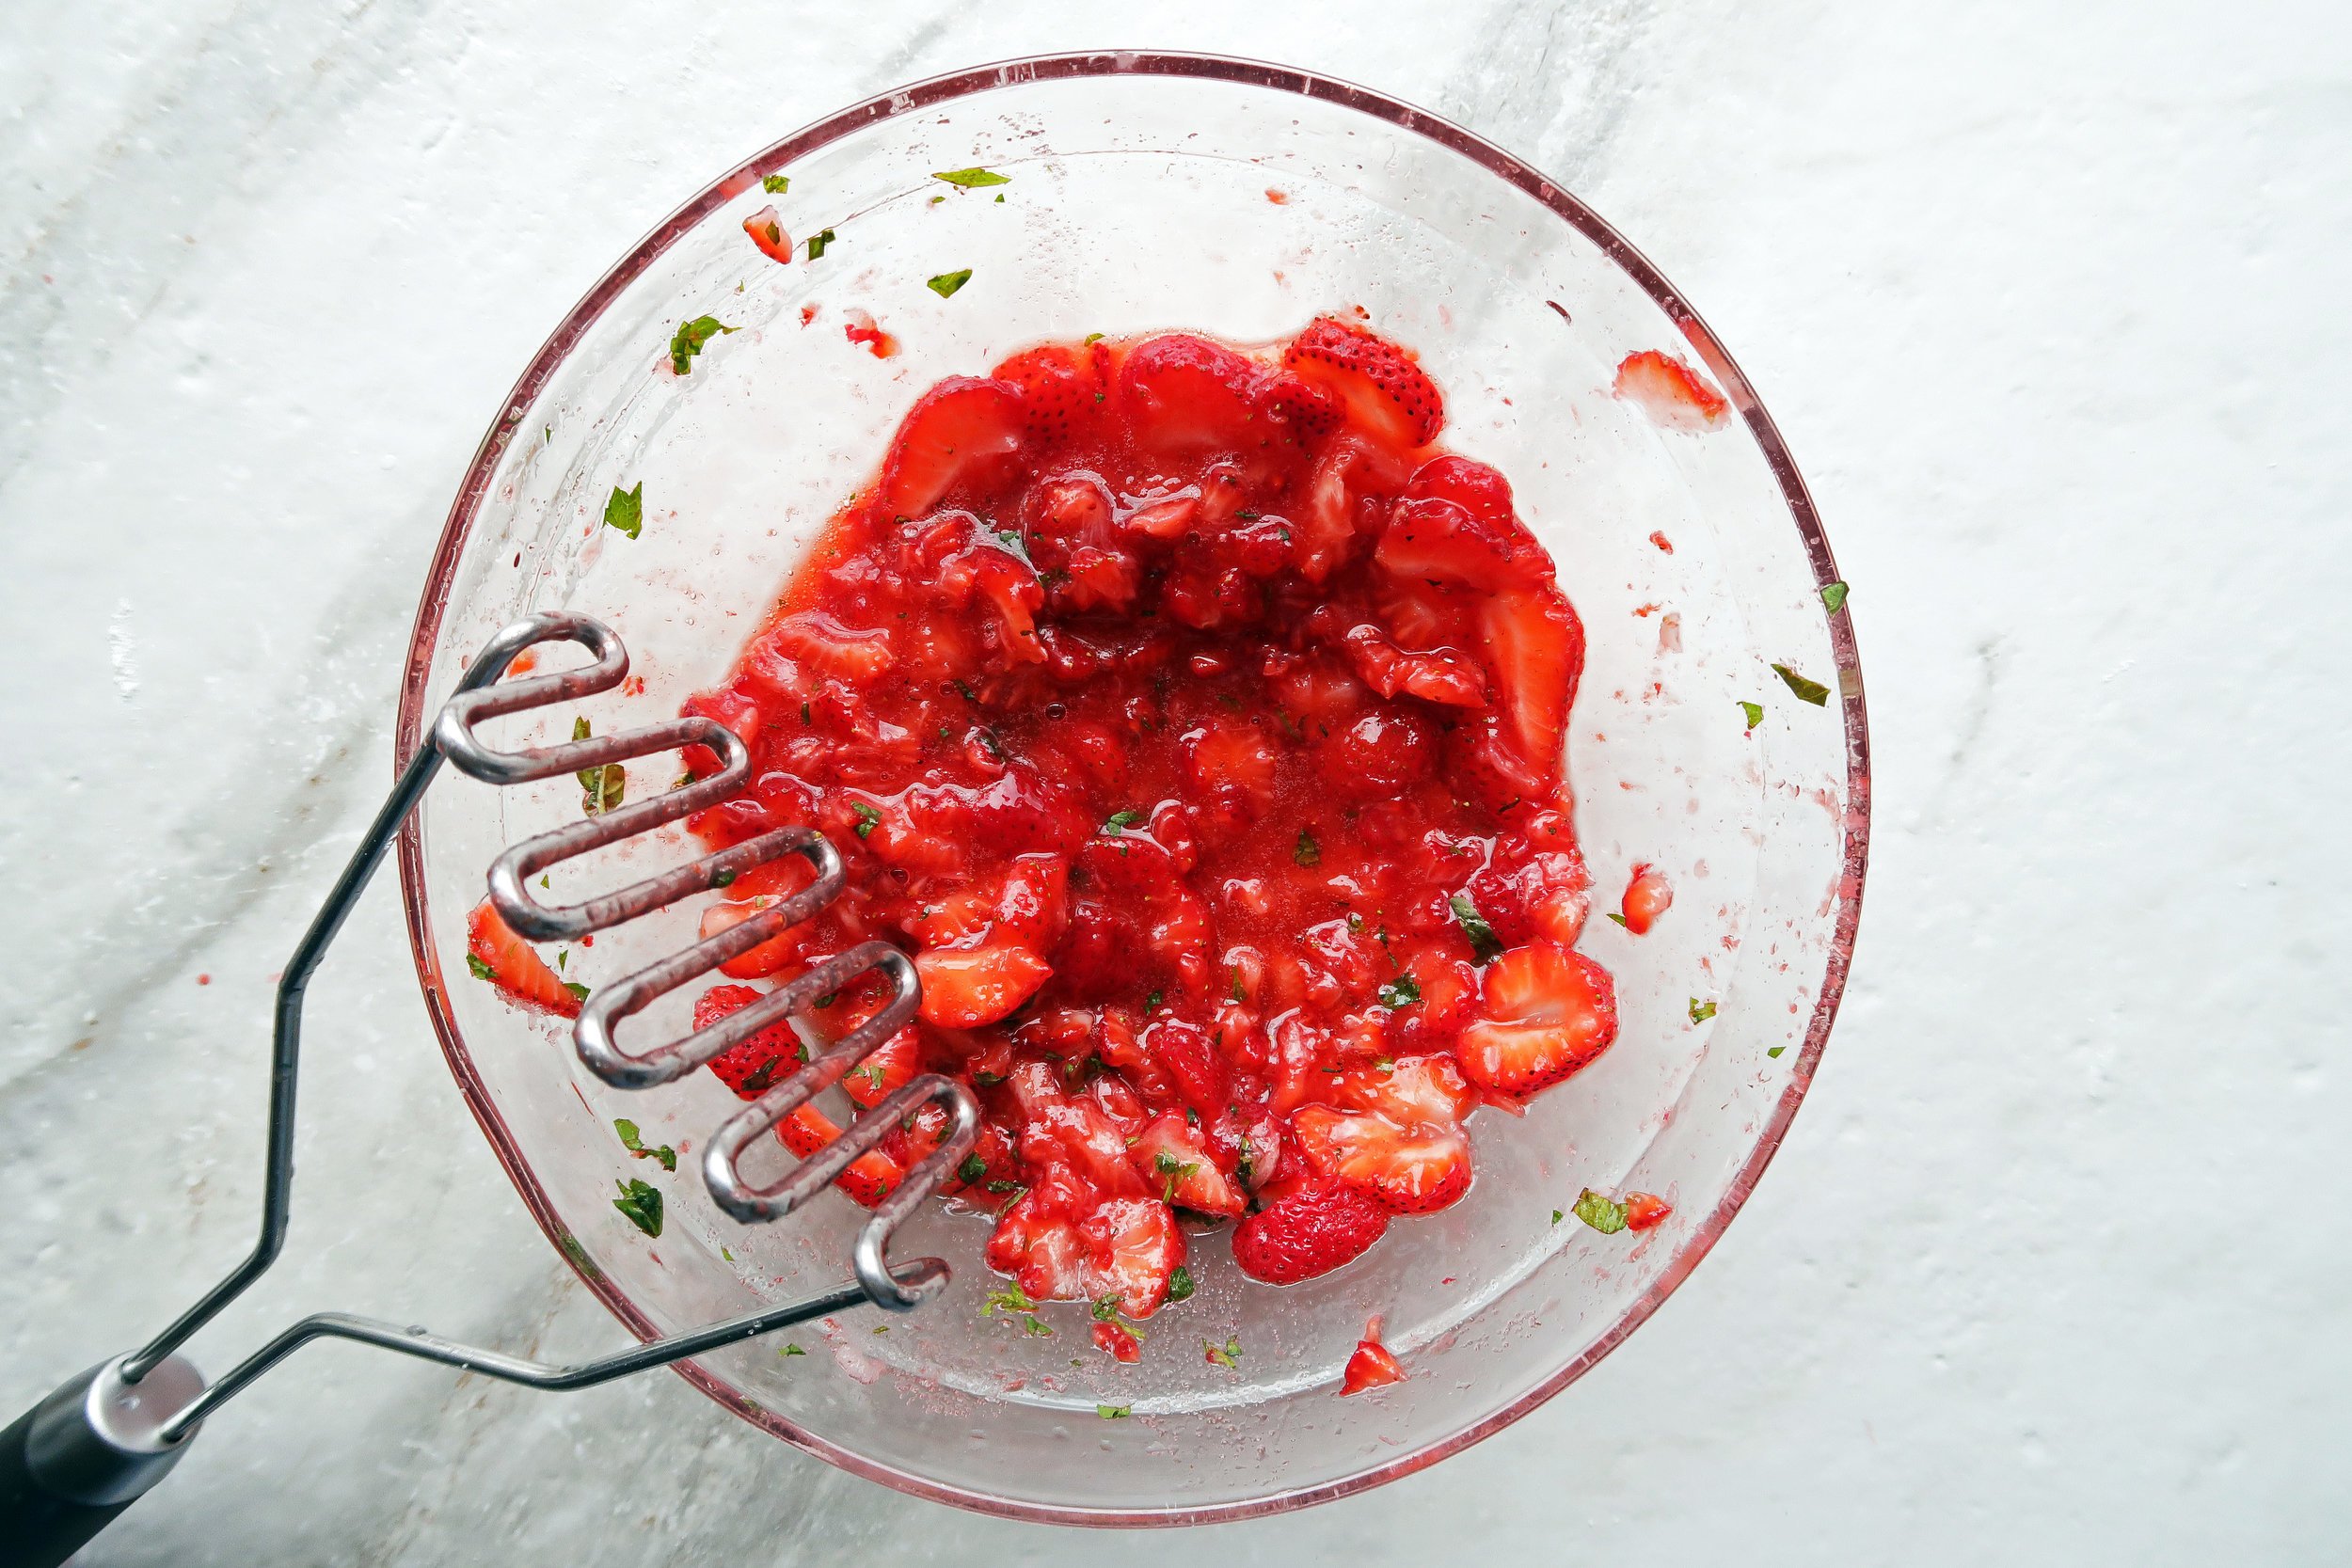 A vibrant bowl of mashed strawberries with pieces of fresh mint.